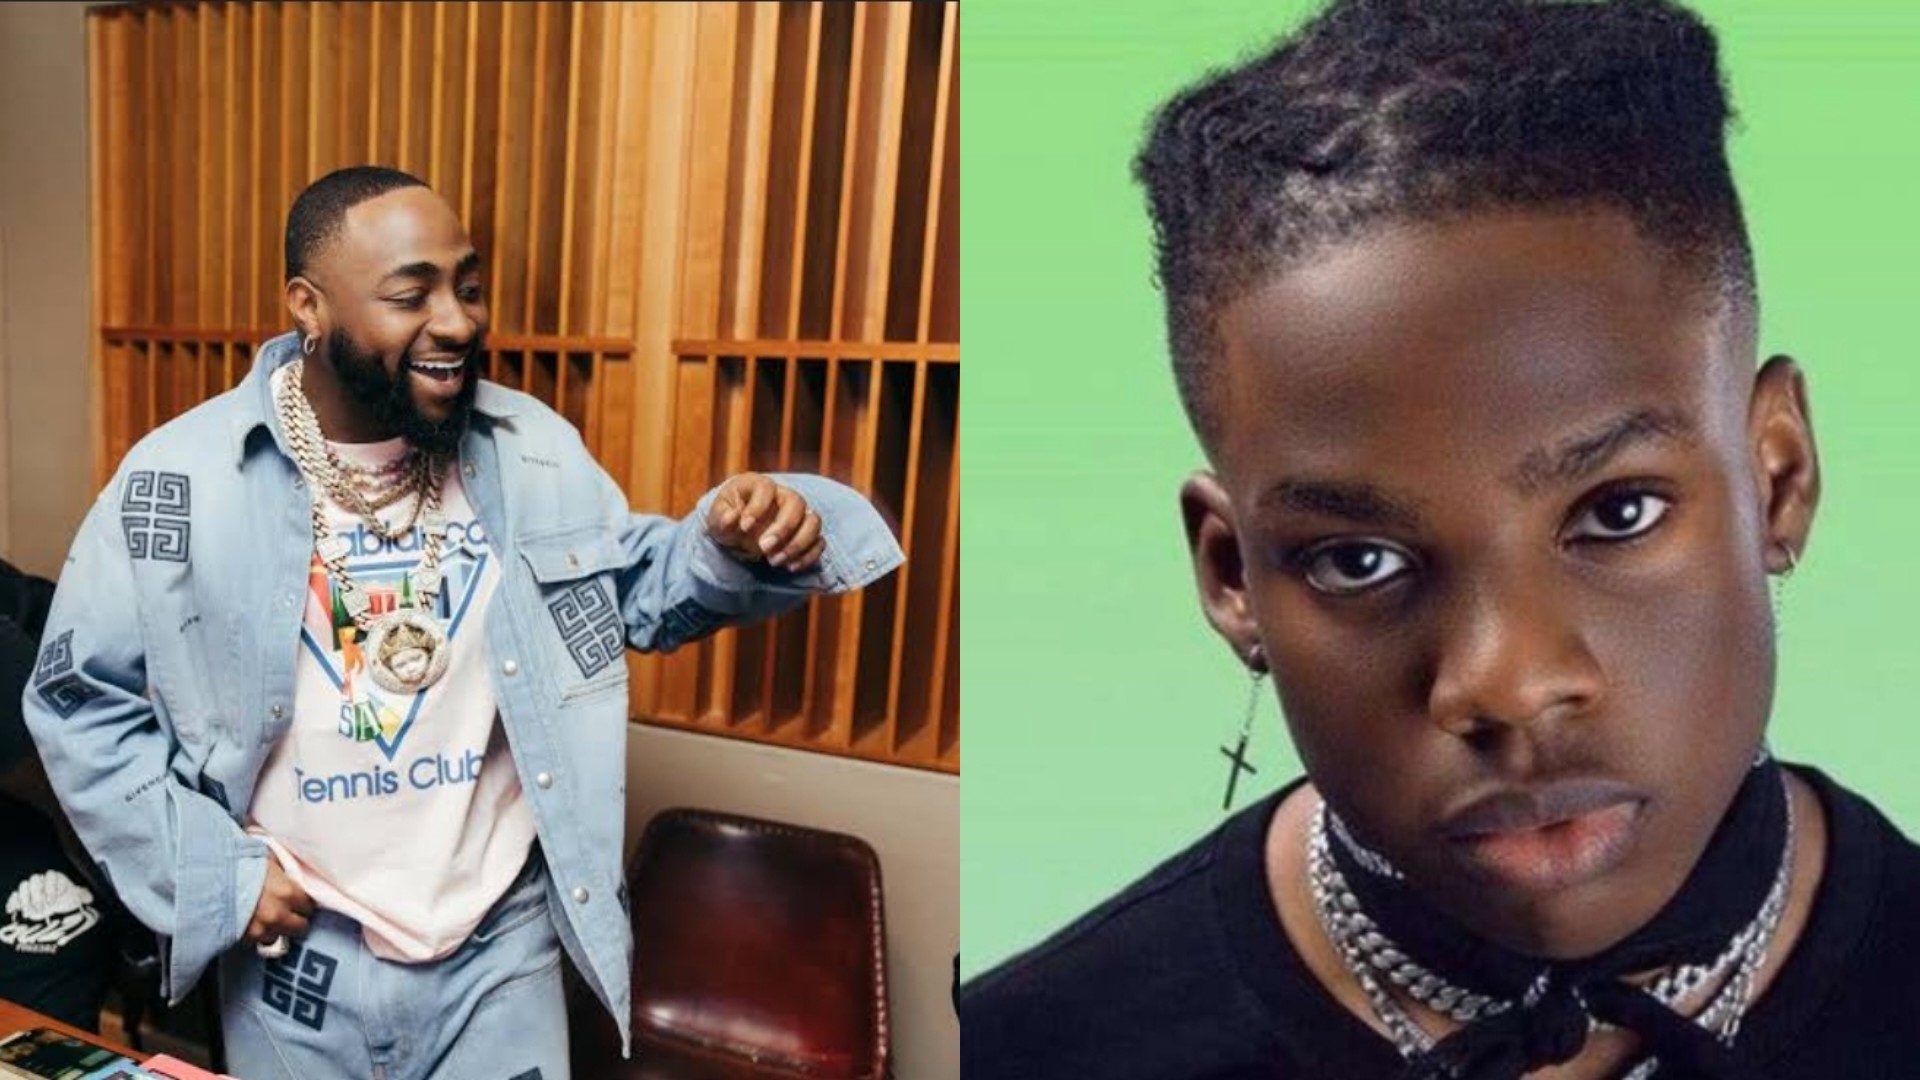 “The job ain’t easy” – Singer Davido reacts after colleague, Rema announced break from music